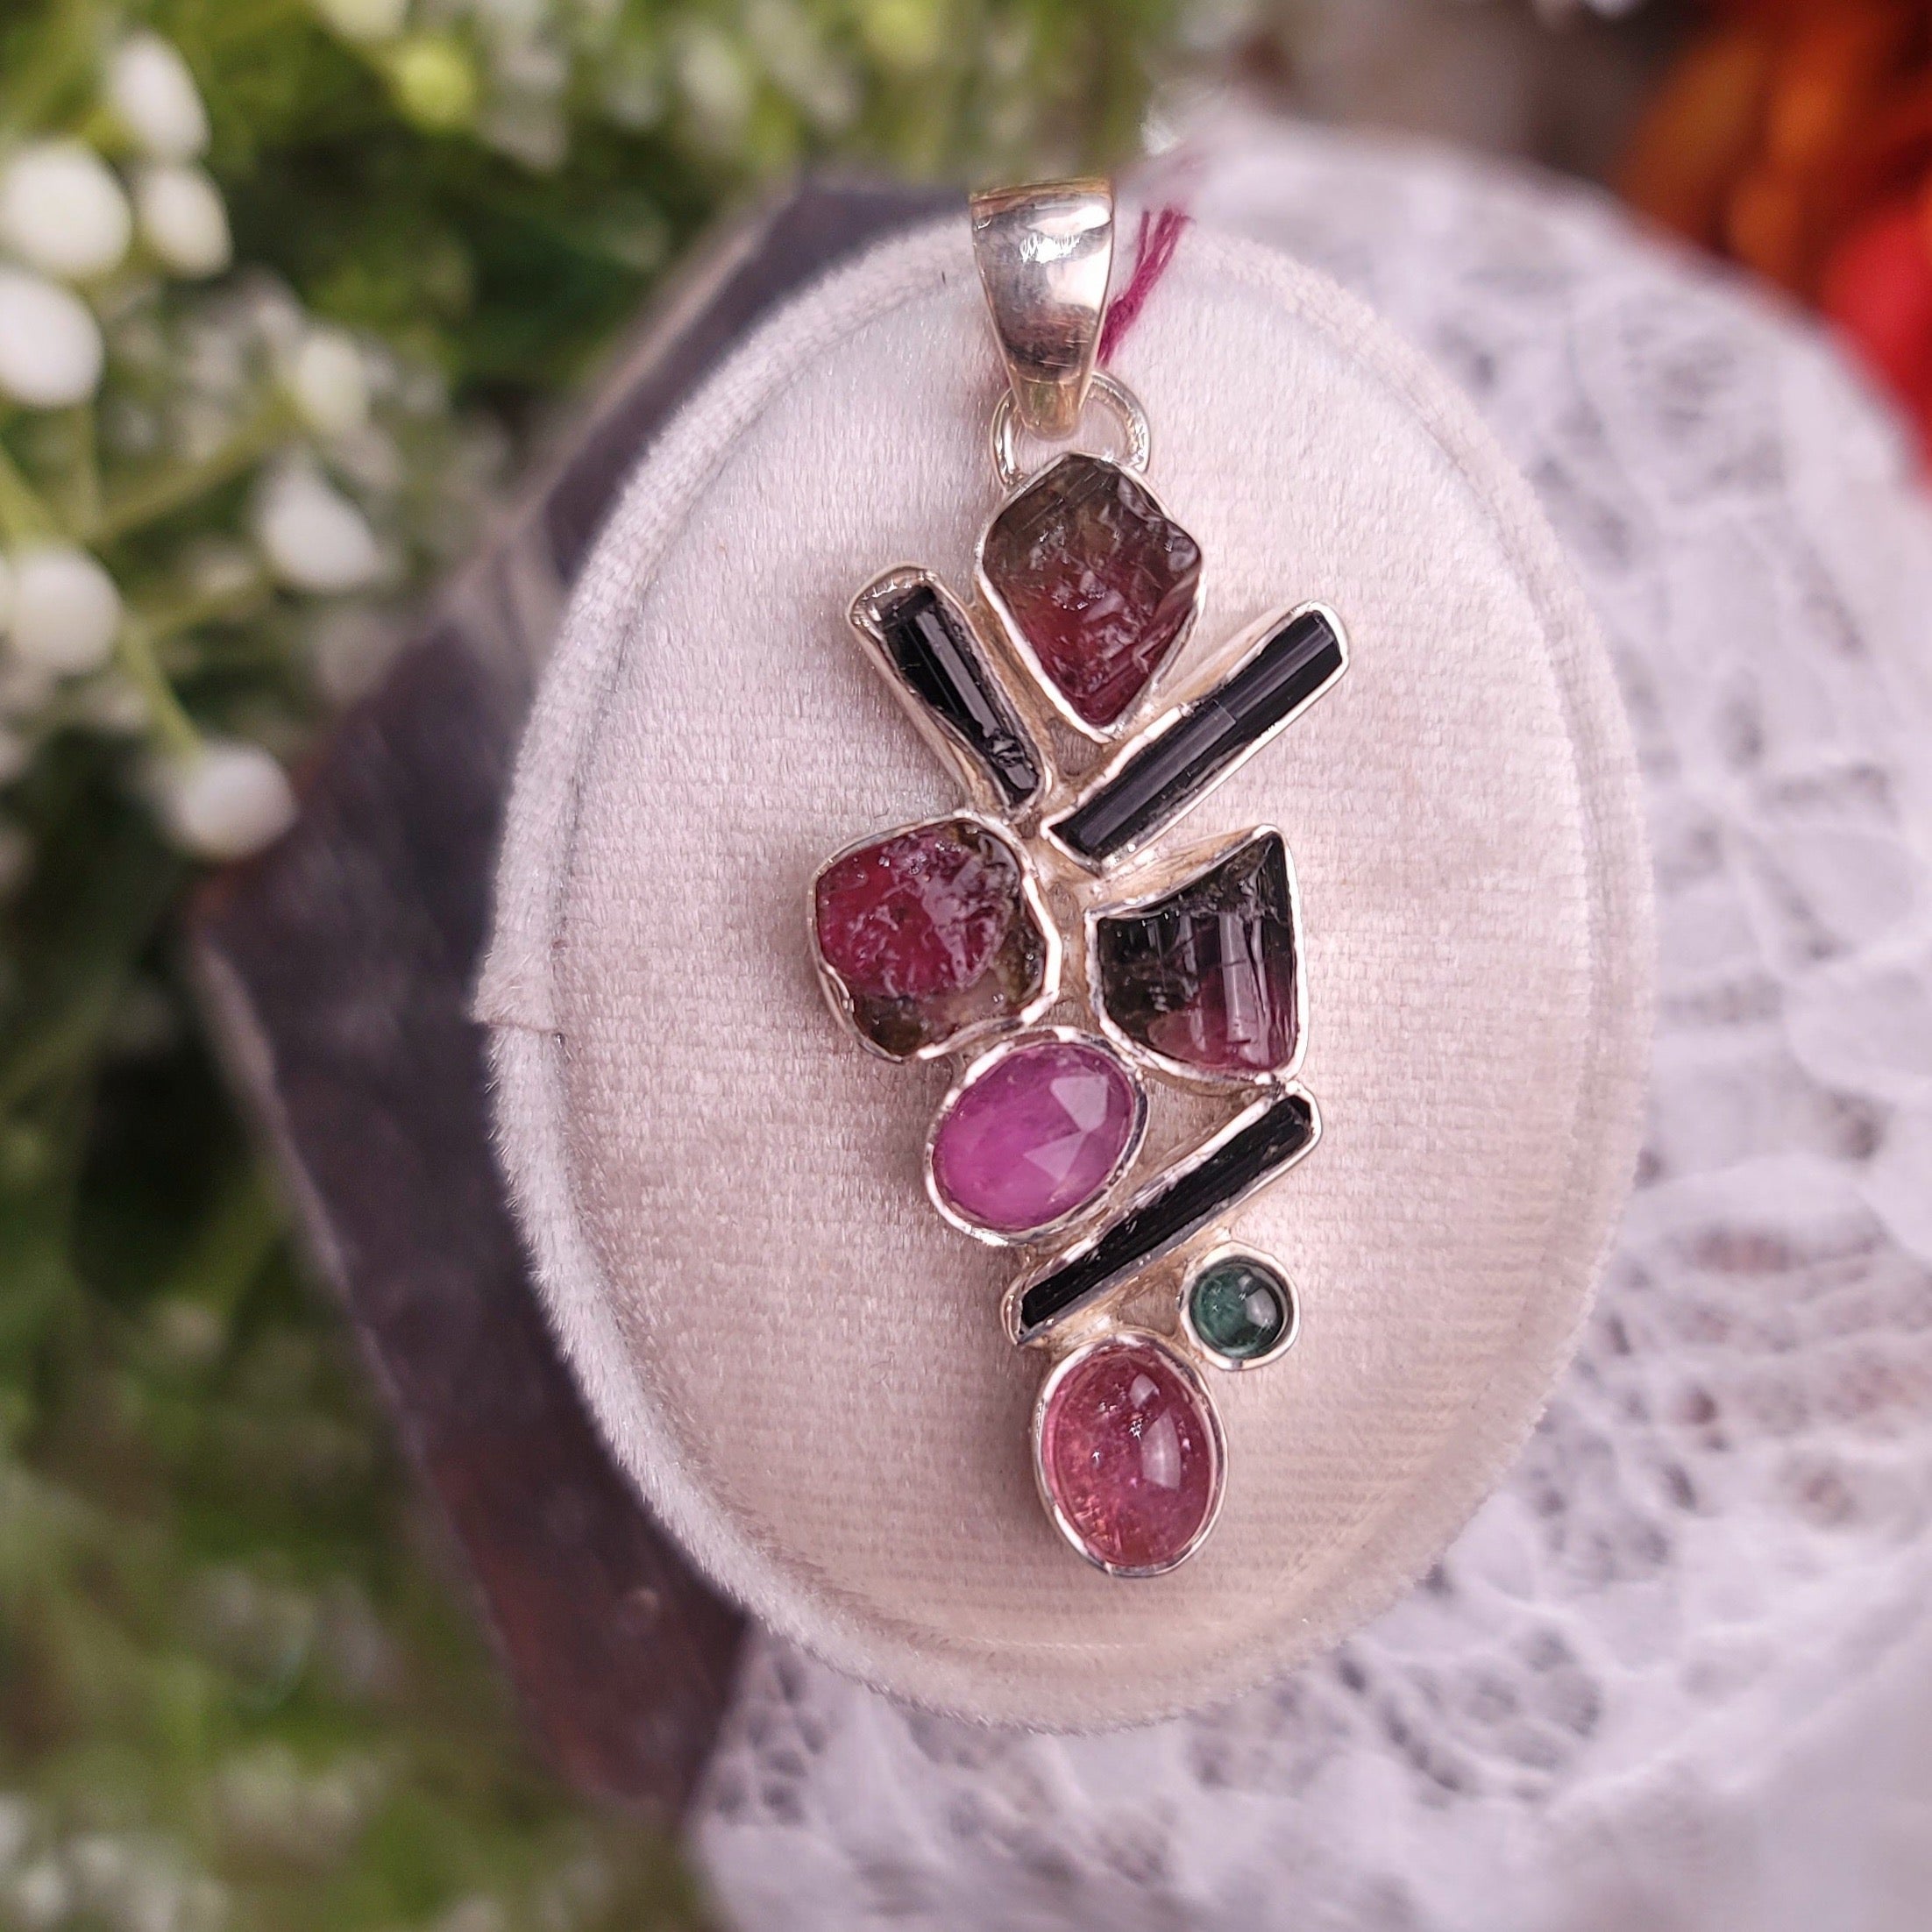 Watermelon Tourmaline Pendant for Removing Insecurities and Helping Inspire Creativity